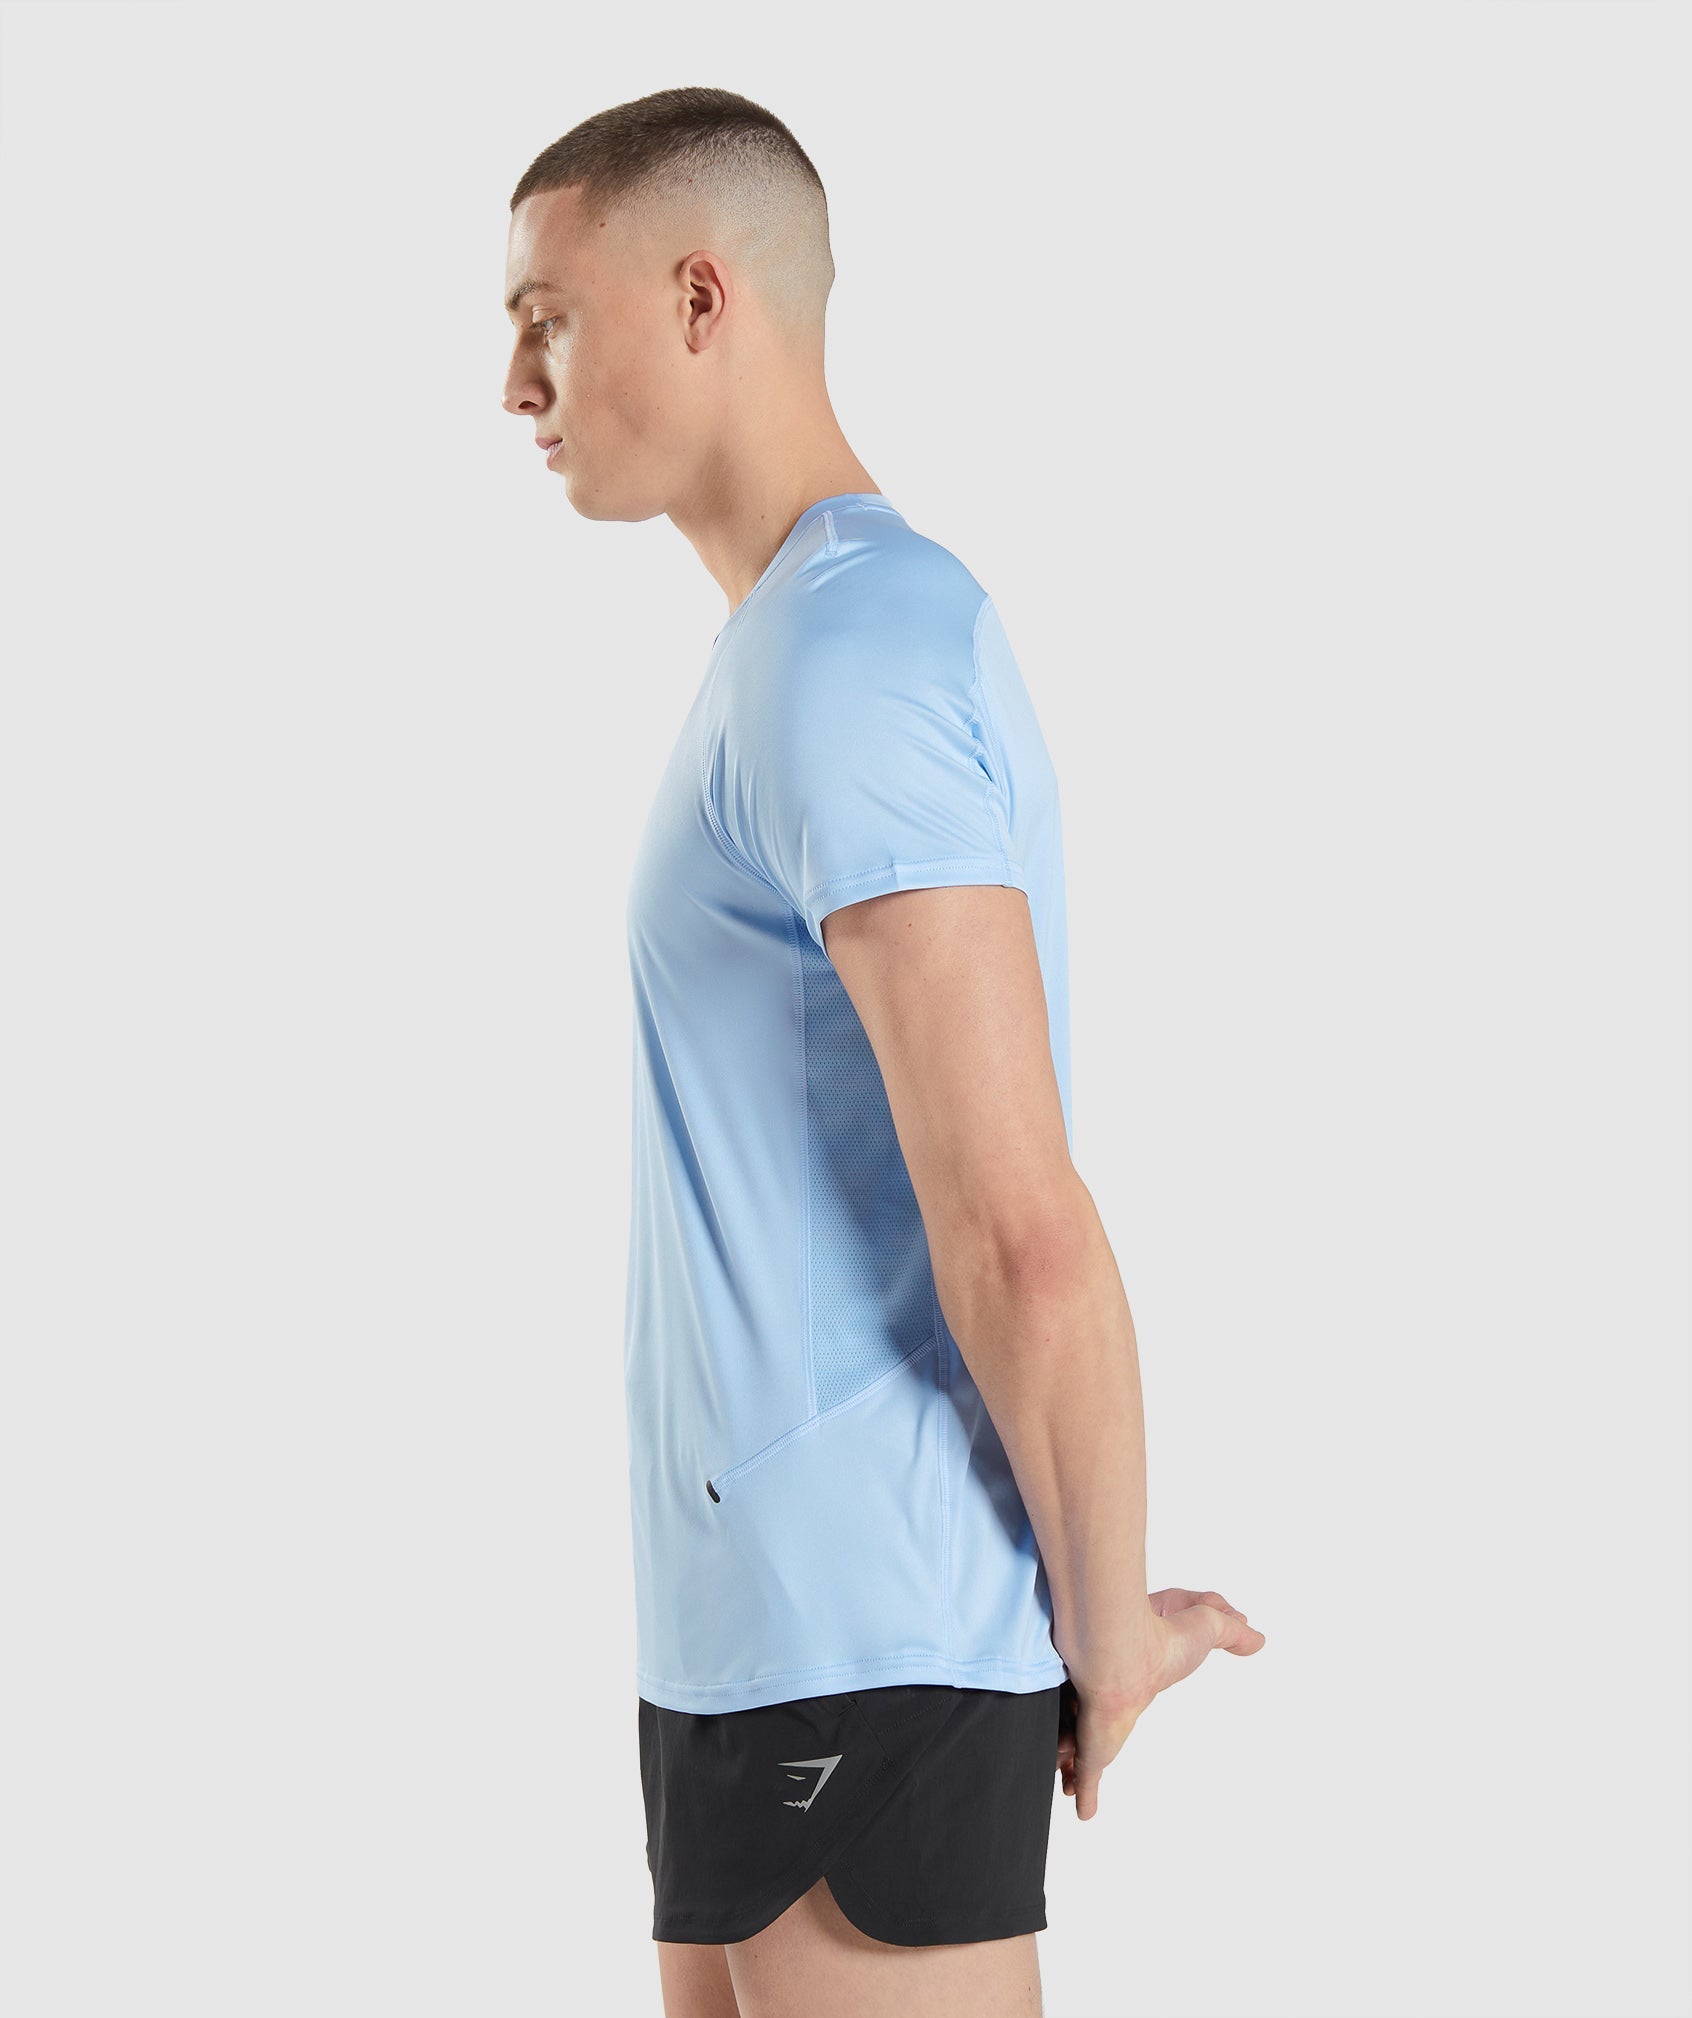 Speed Evolve T-Shirt in Moonstone Blue - view 3